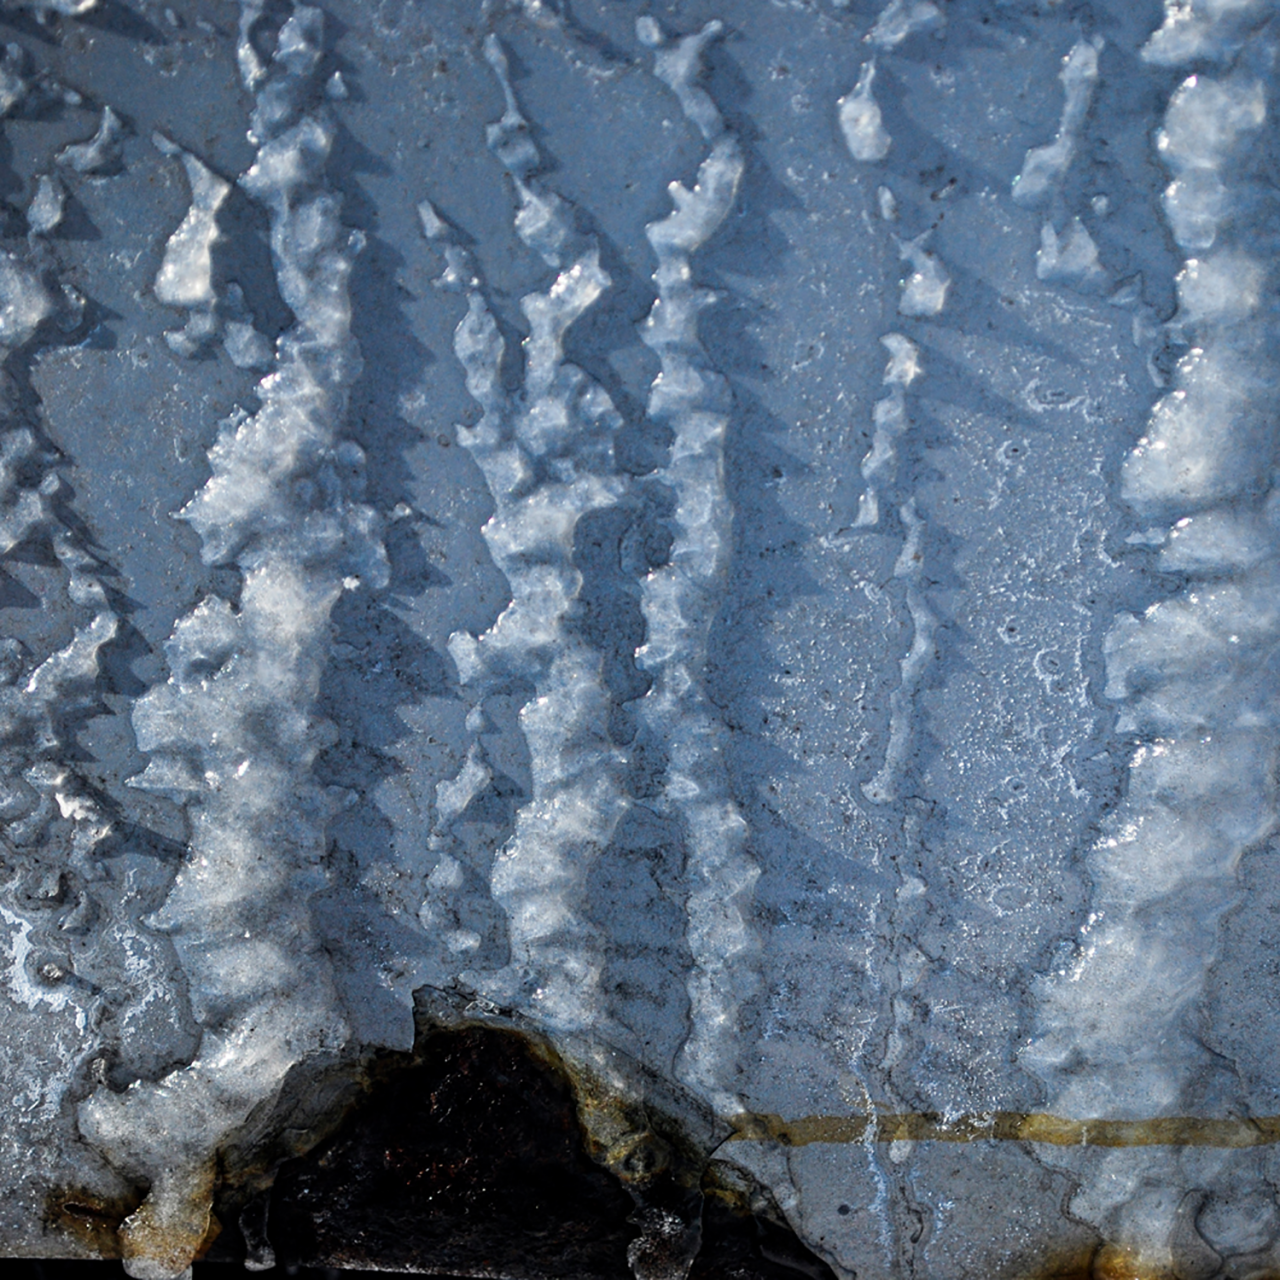 Icicle photography series with close up imagery. 